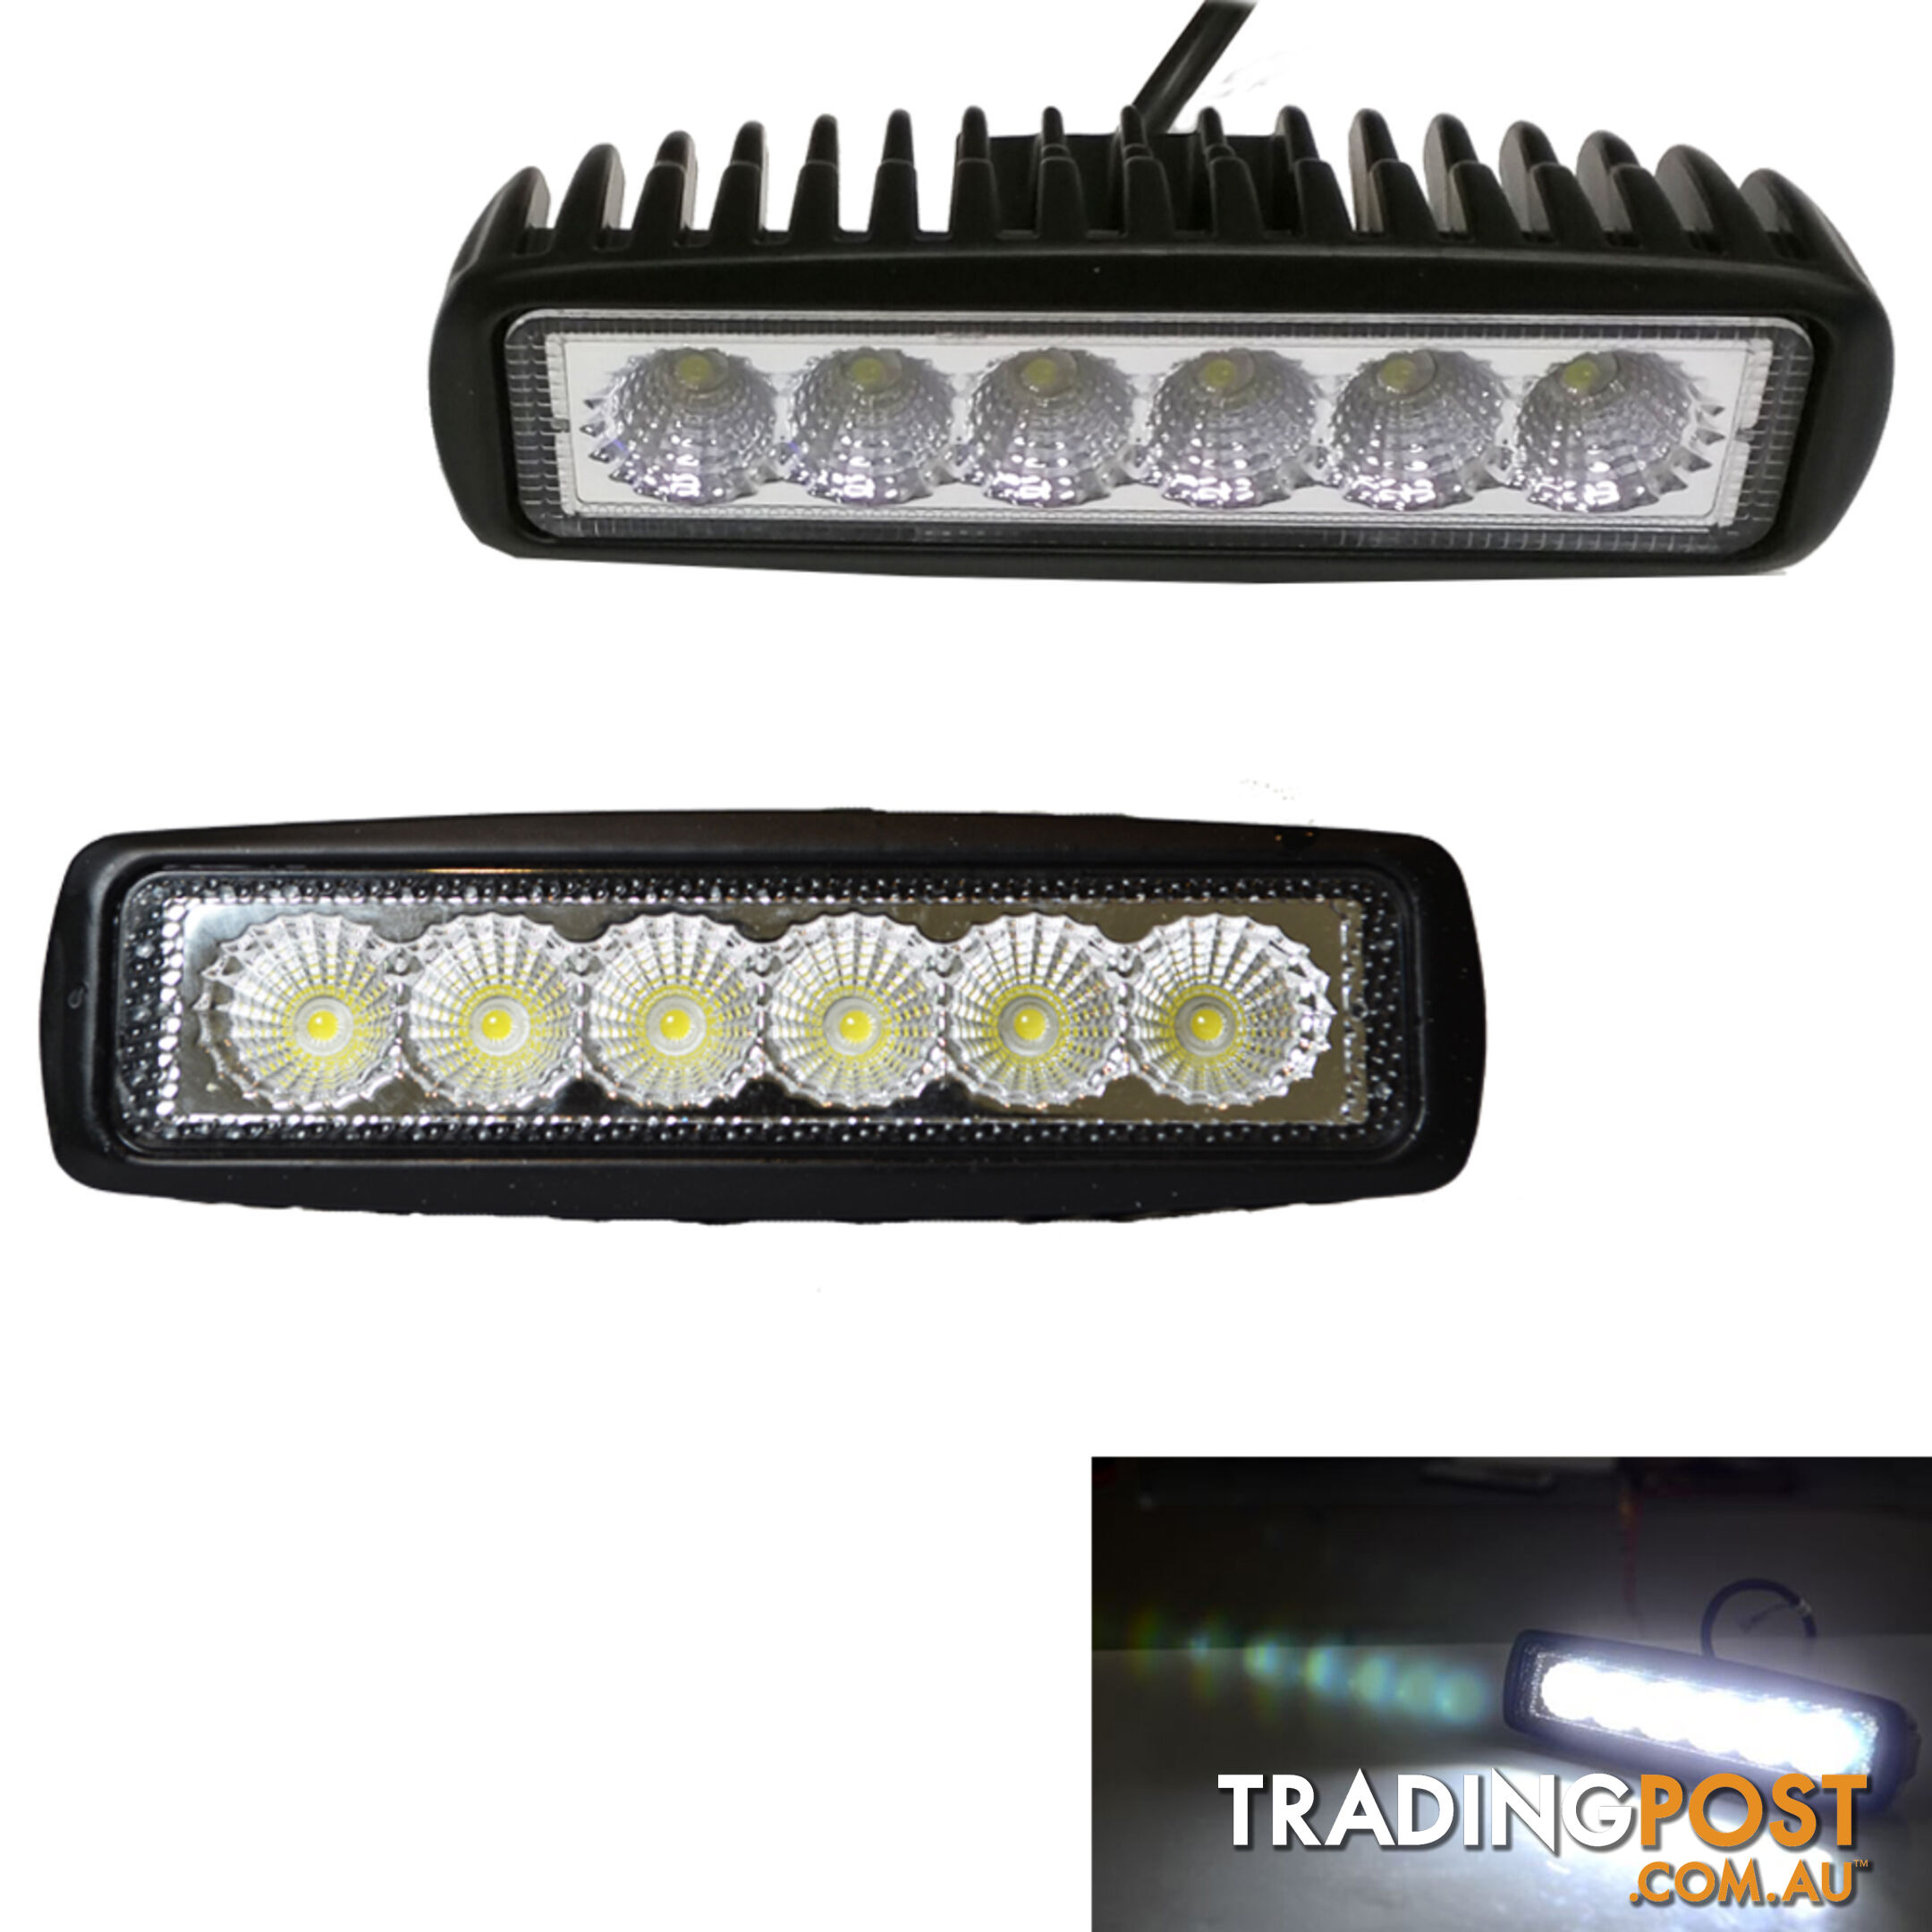 2x 6inch 18W LED Light Bar Driving Work Lamp Flood Truck Offroad UTE 4WD